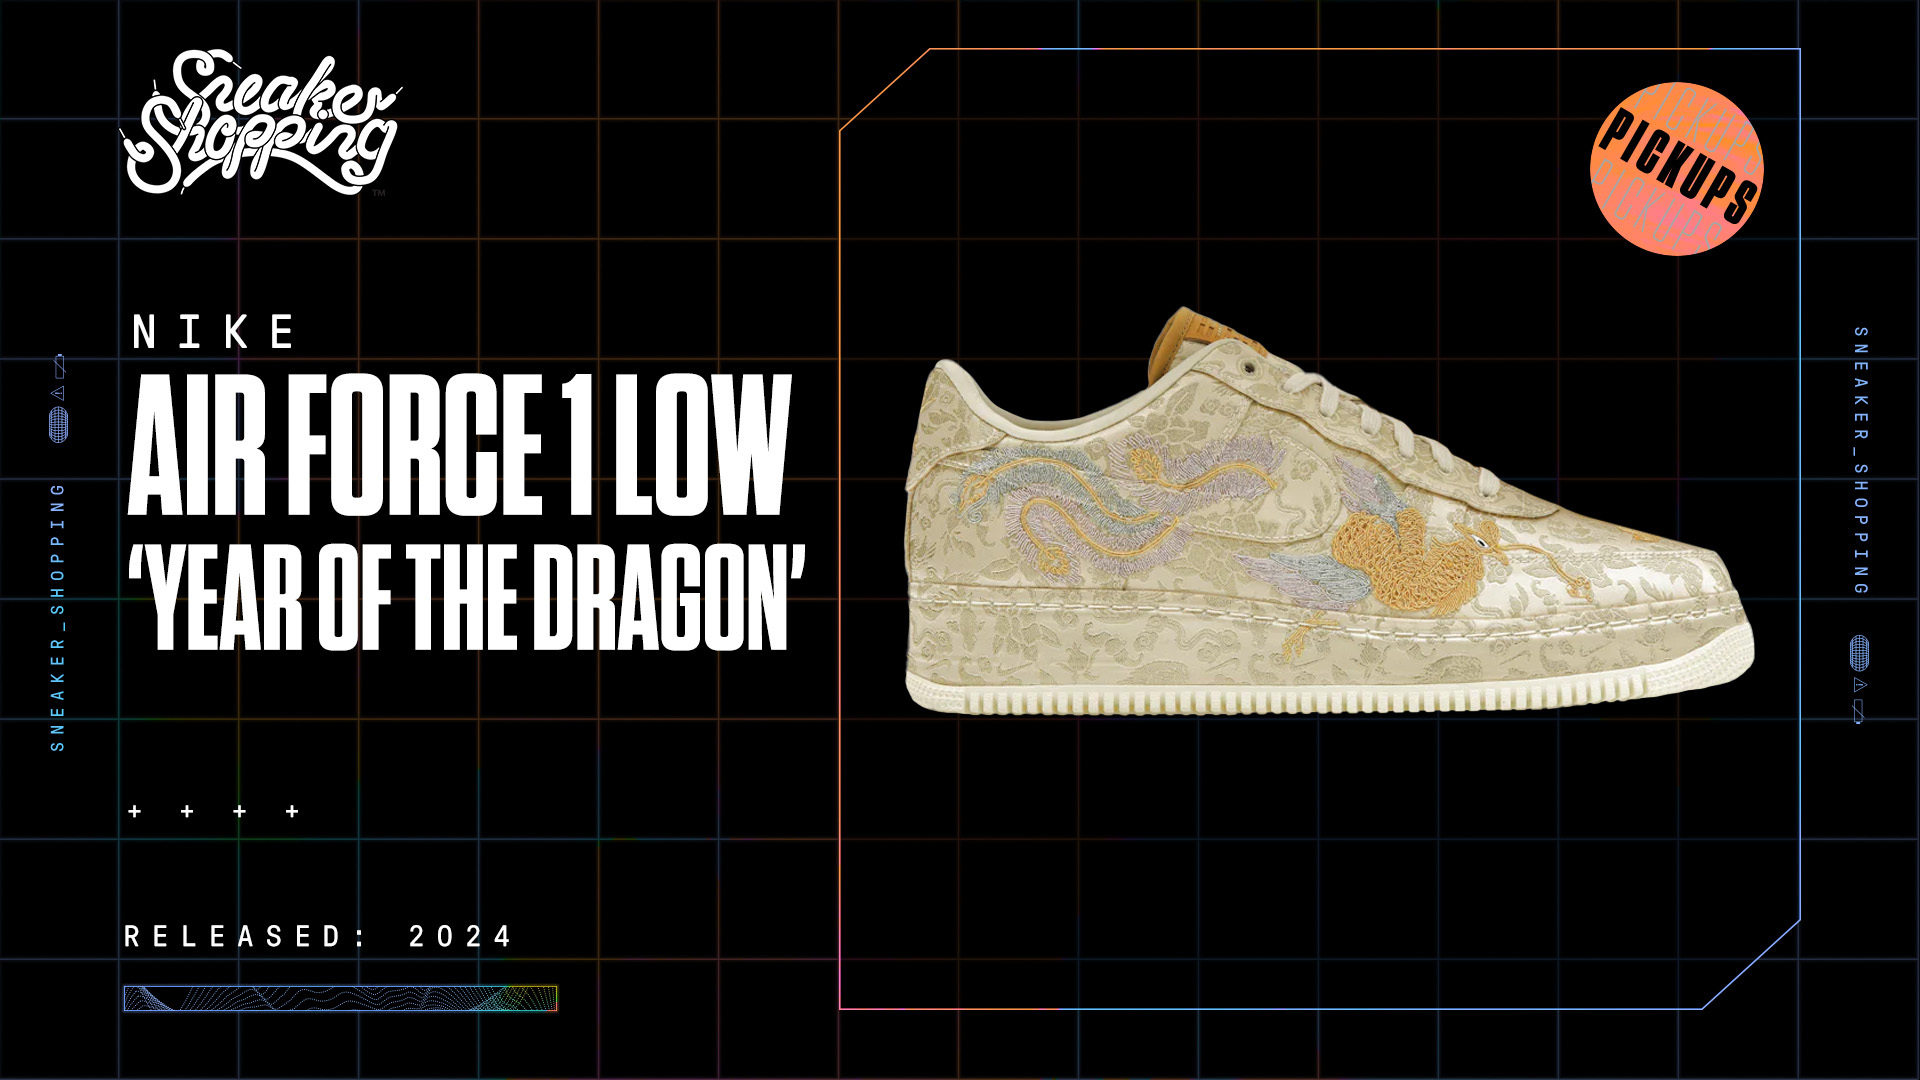 Nike Air Force 1 Low &#x27;Year of the Dragon&#x27; sneaker releasing in 2024